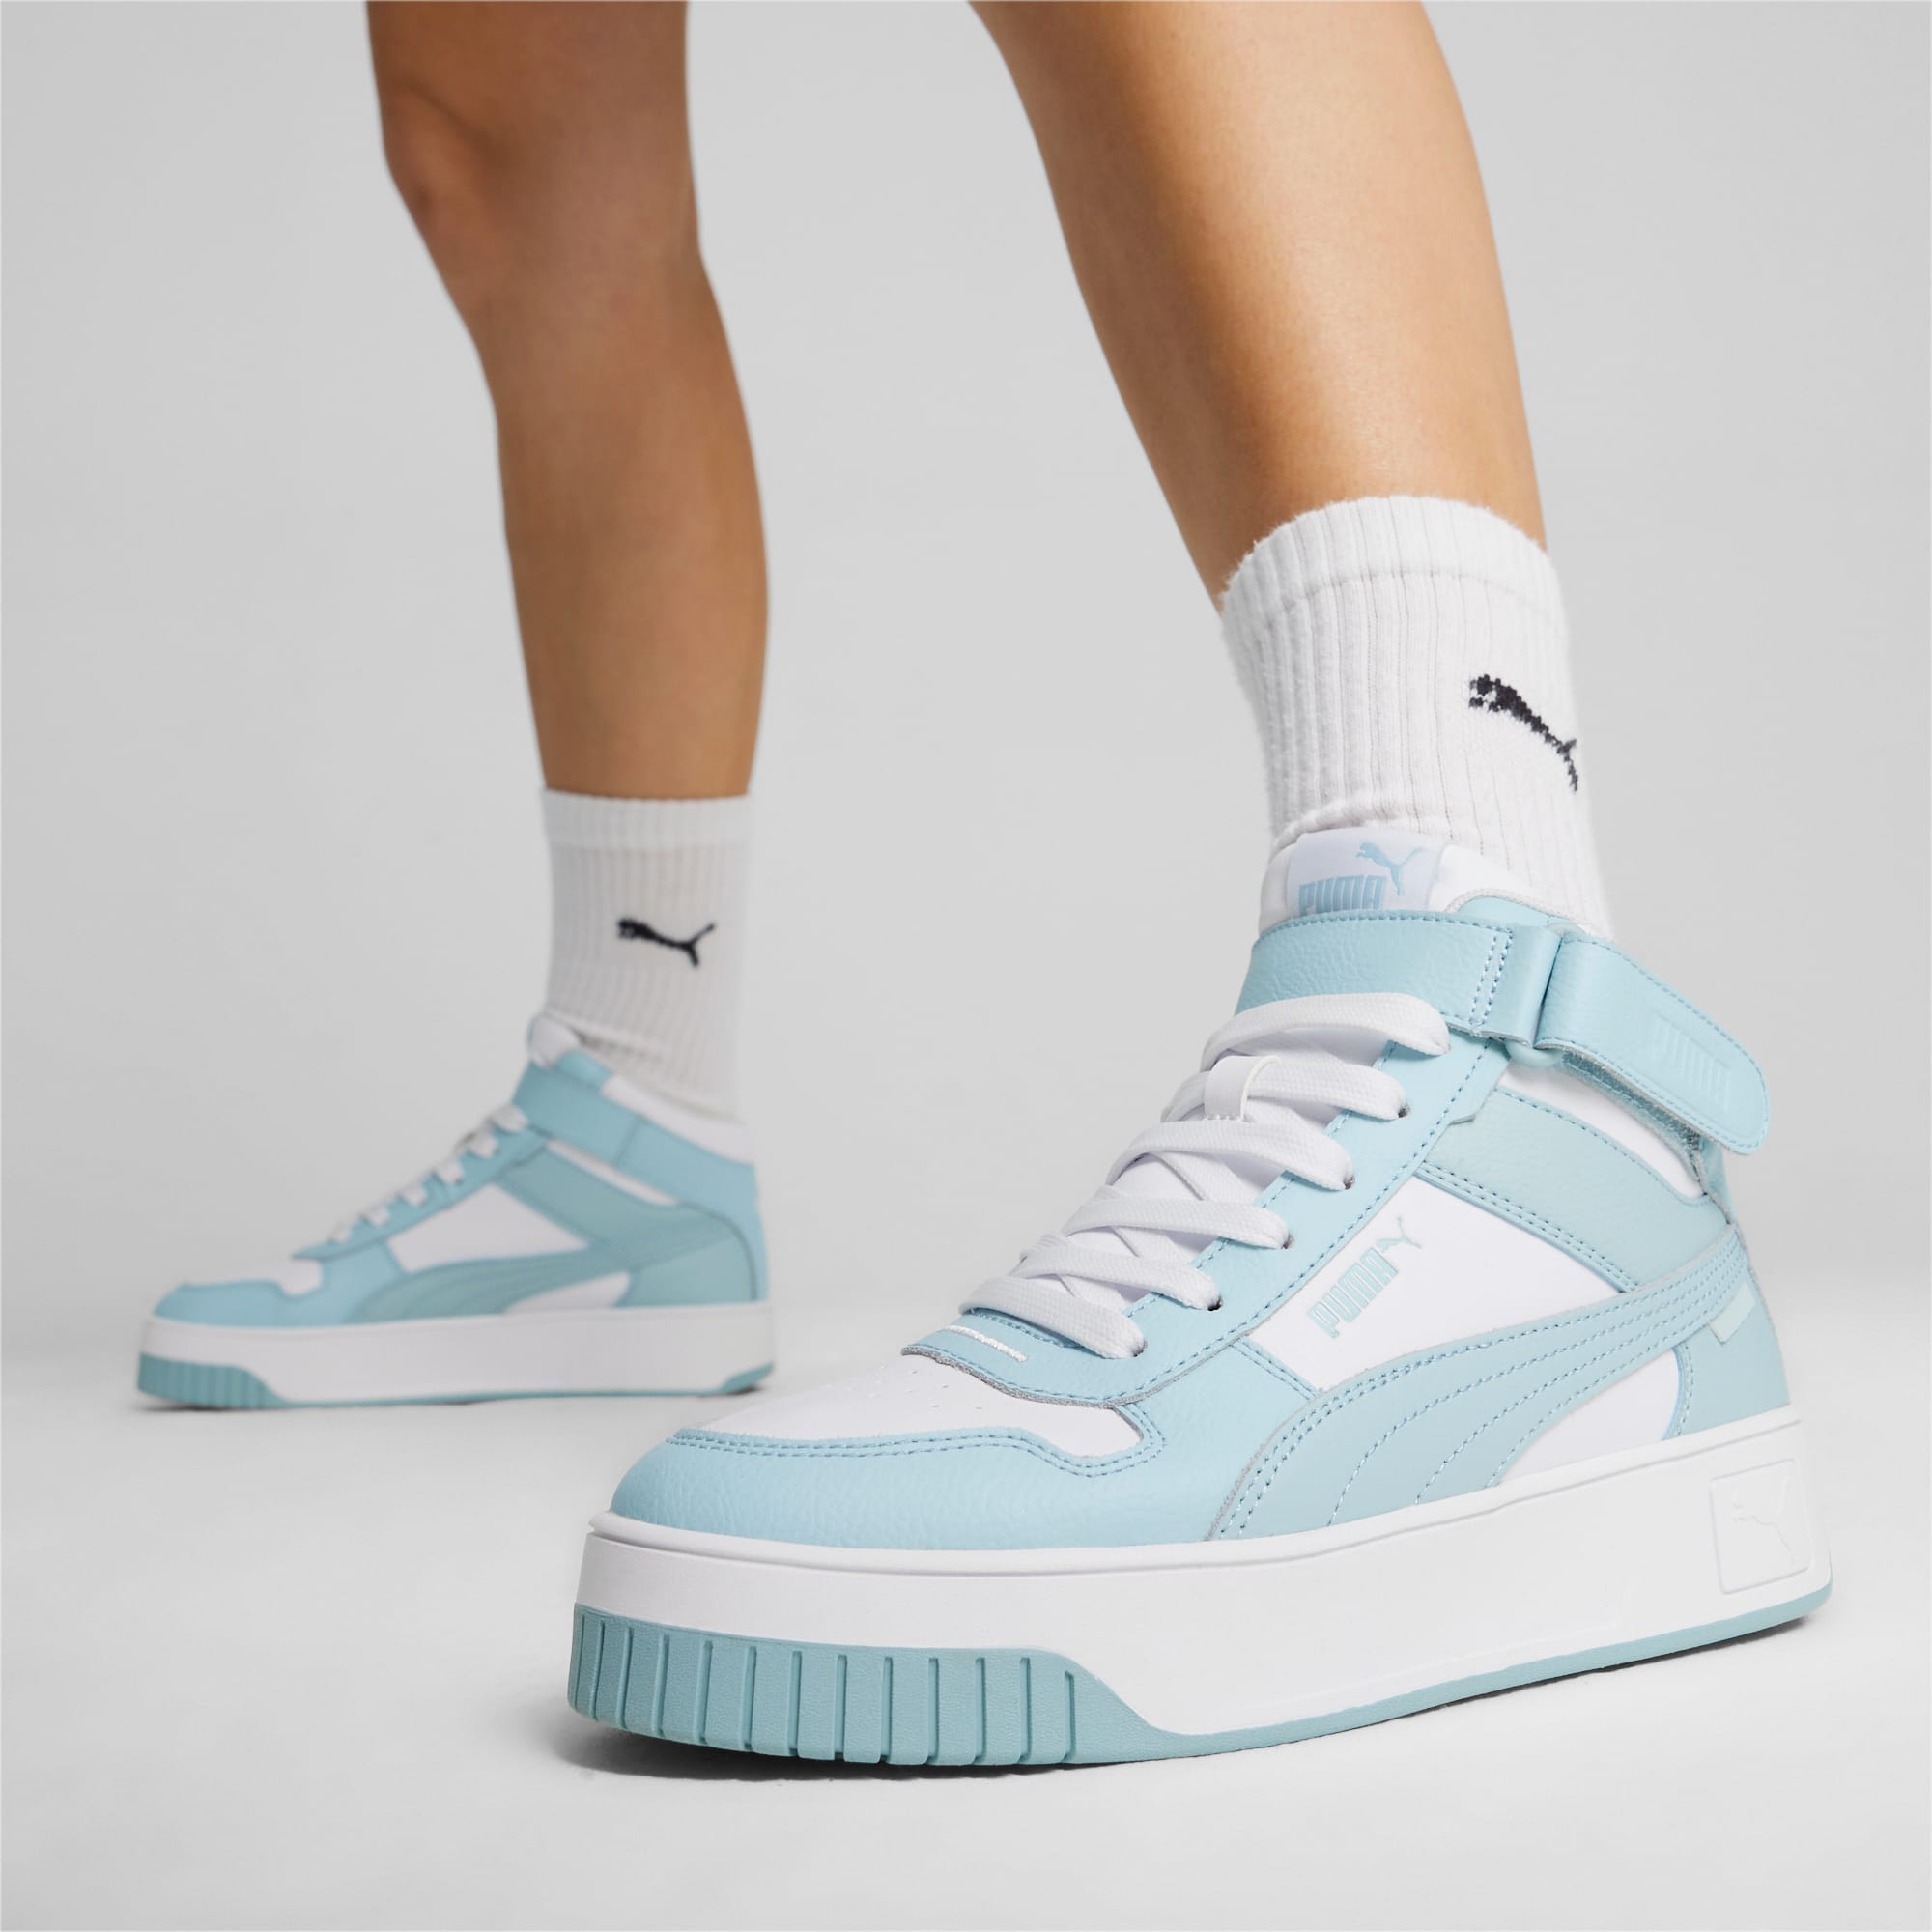 PUMA Carina Street Mid Women's Sneakers, White/Turquoise Surf, Size 38, Shoes